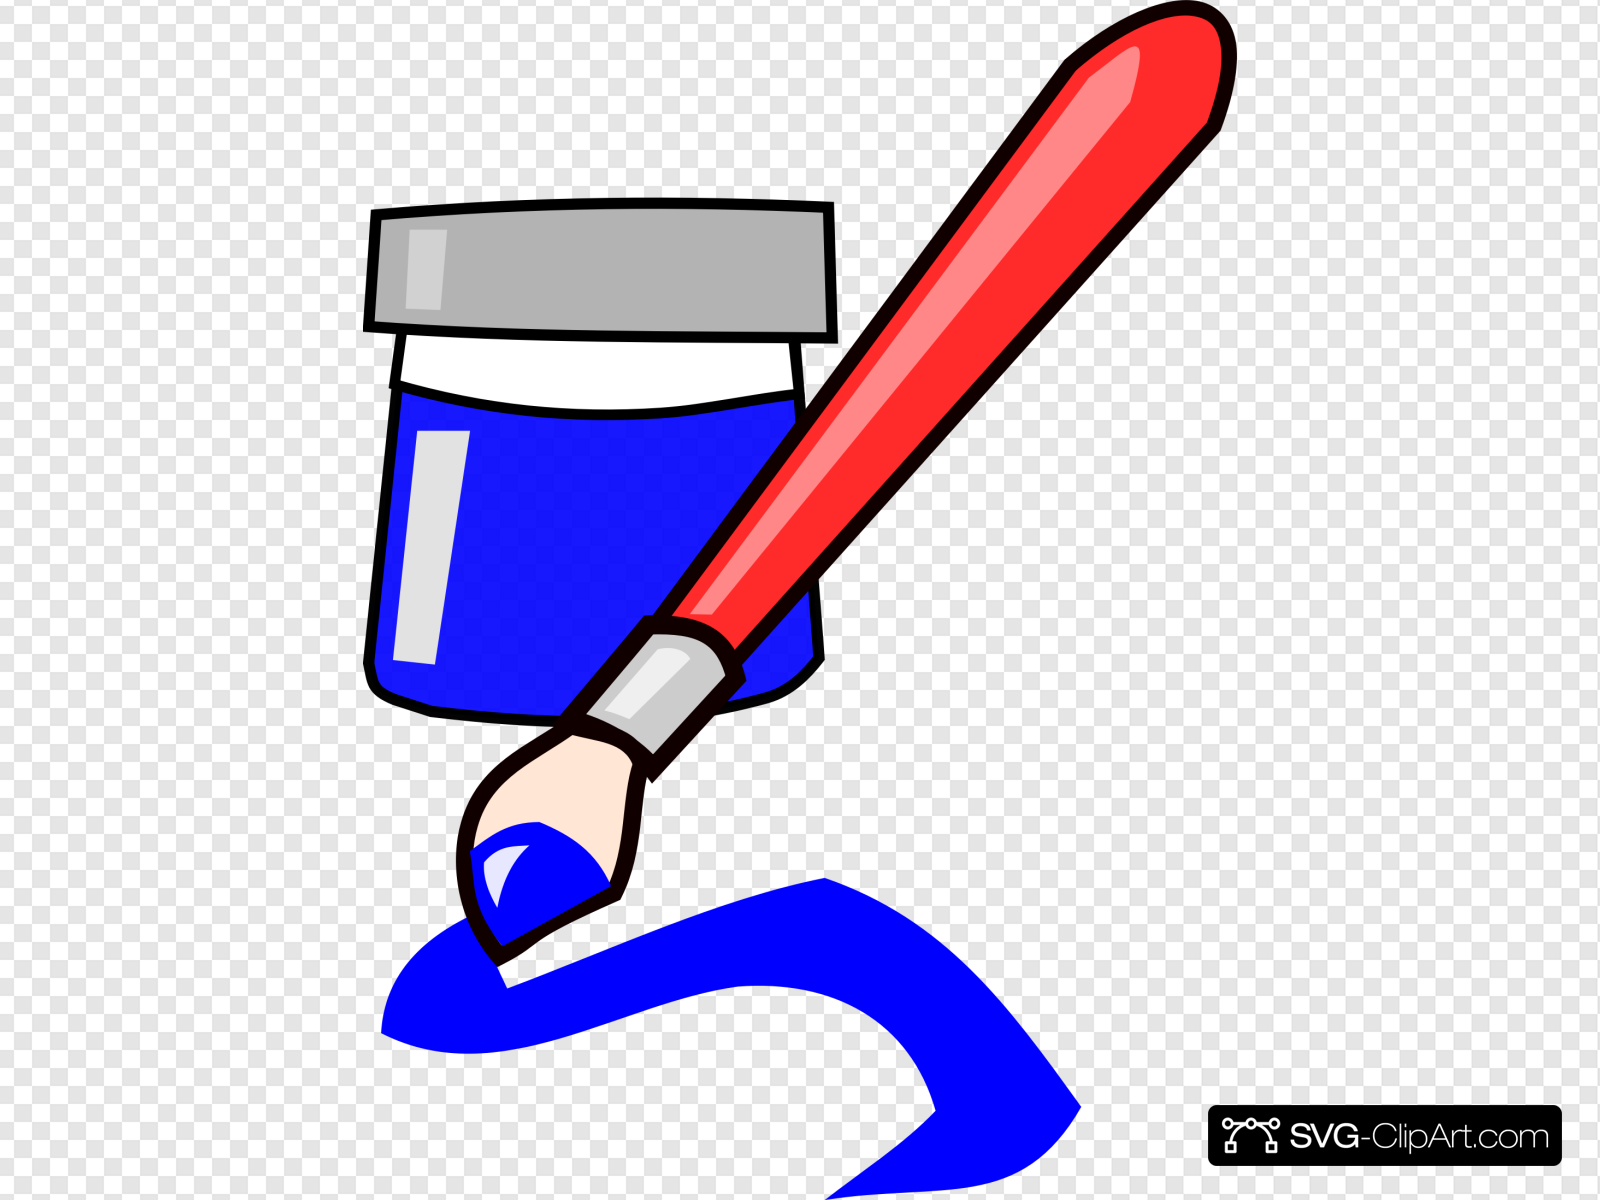 Blue Paintbrush Clip art, Icon and SVG